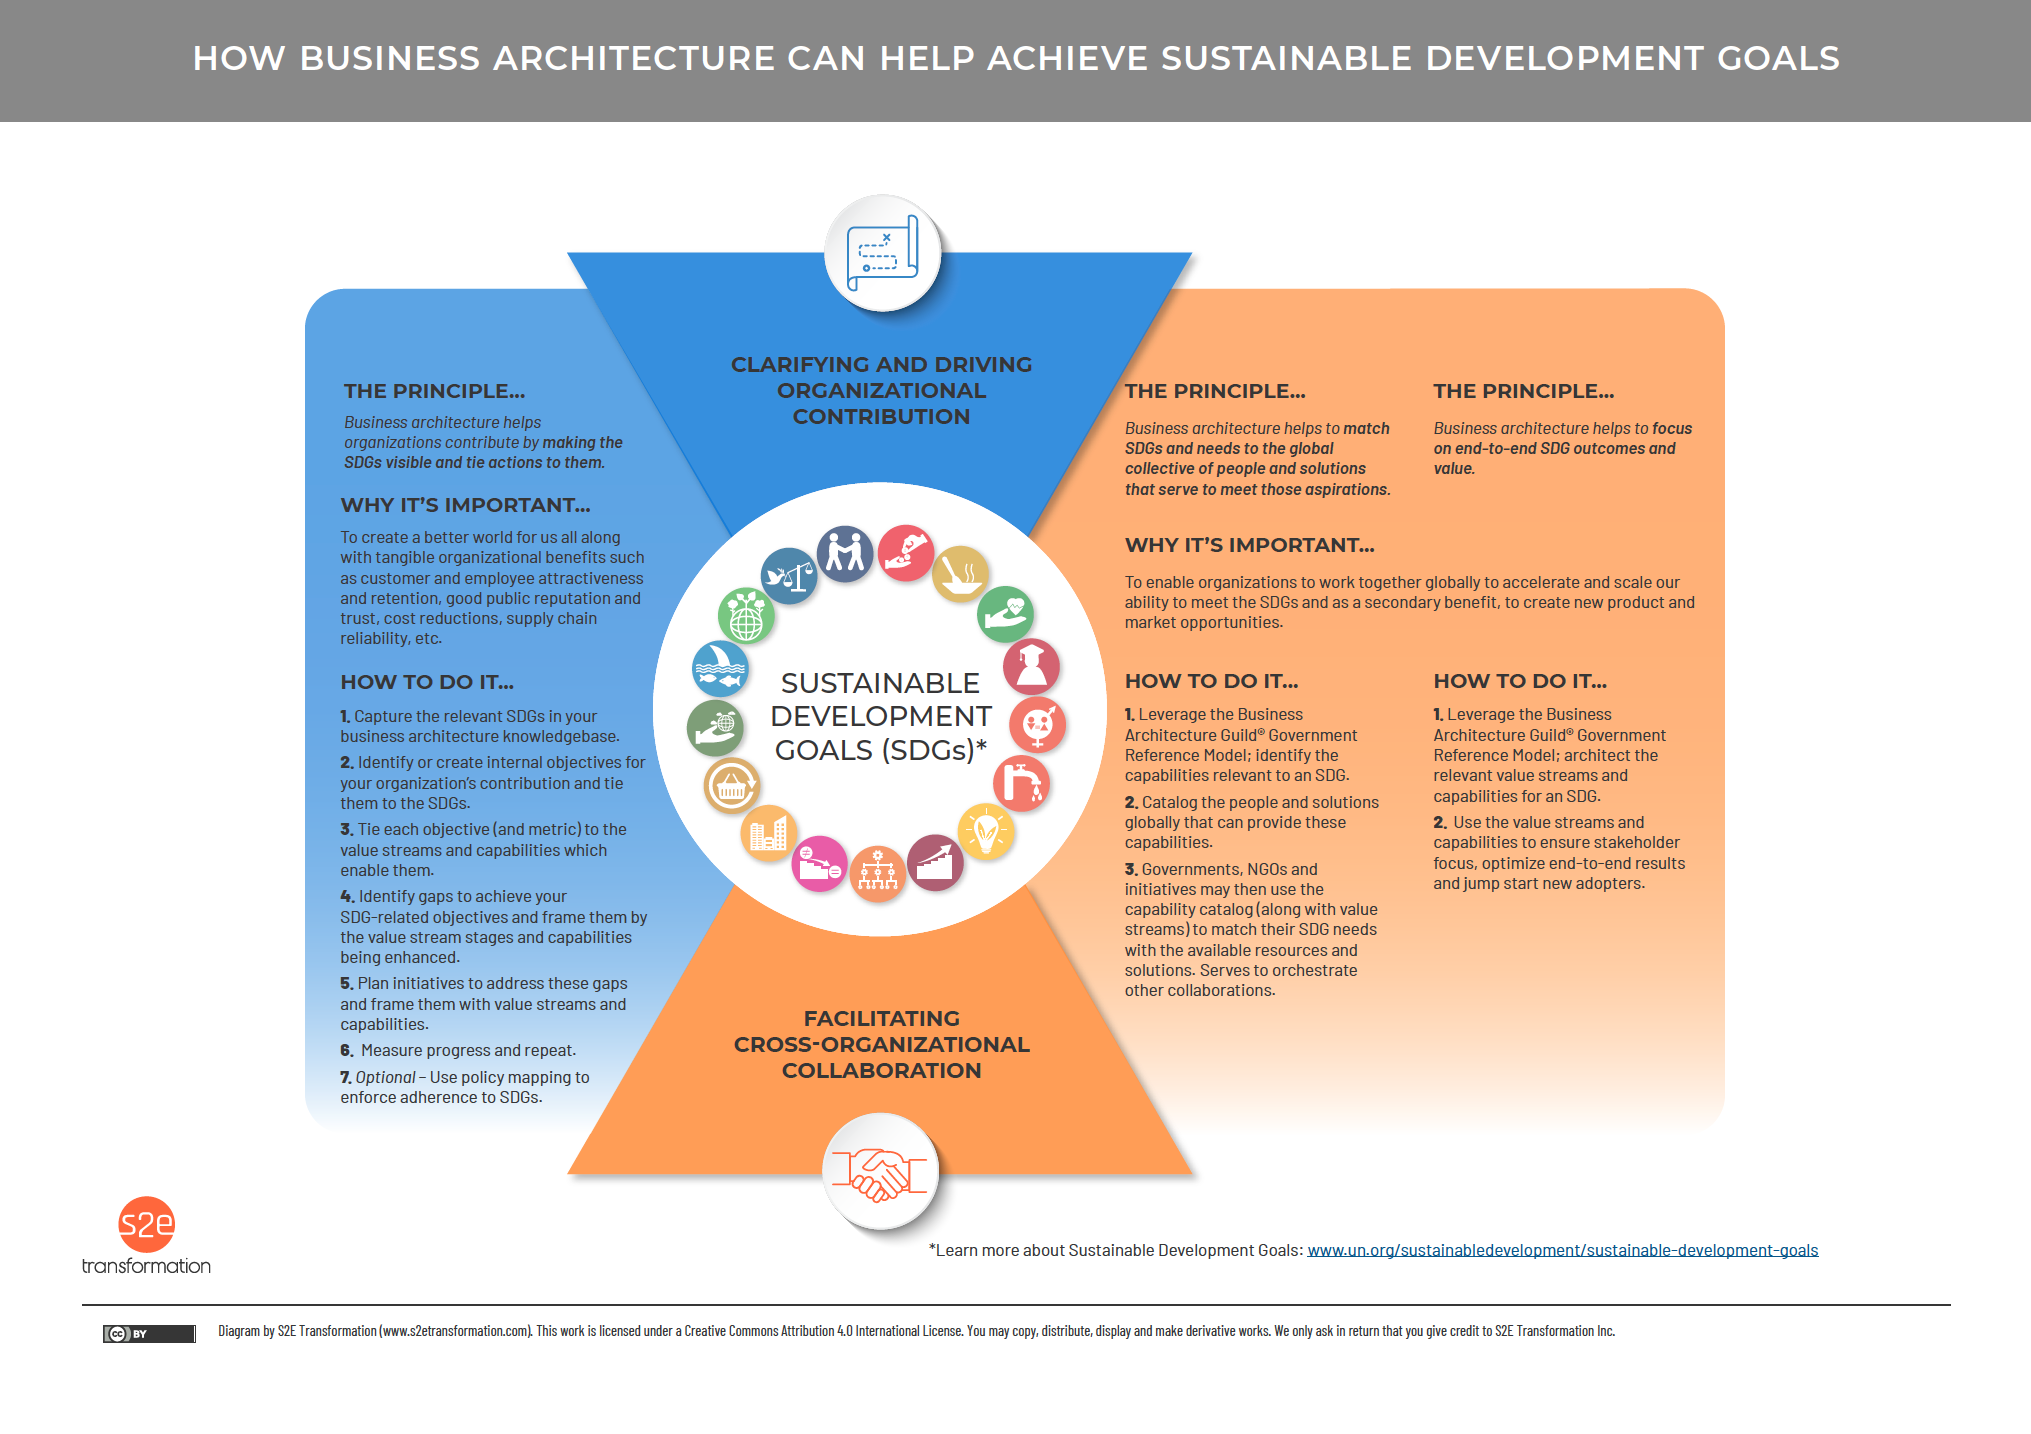 Servant Leadership and Business Architecture